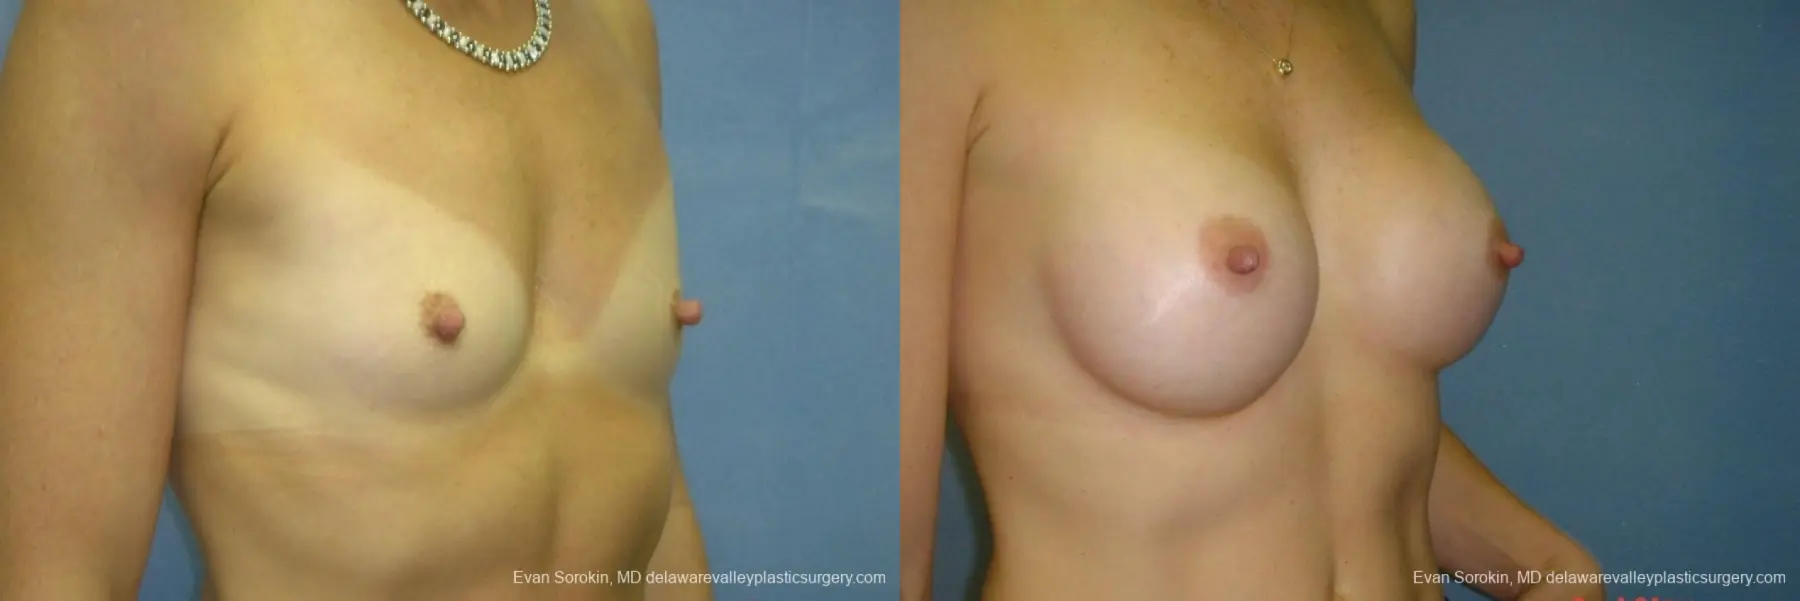 Breast Augmentation 8667 - Before and After 2